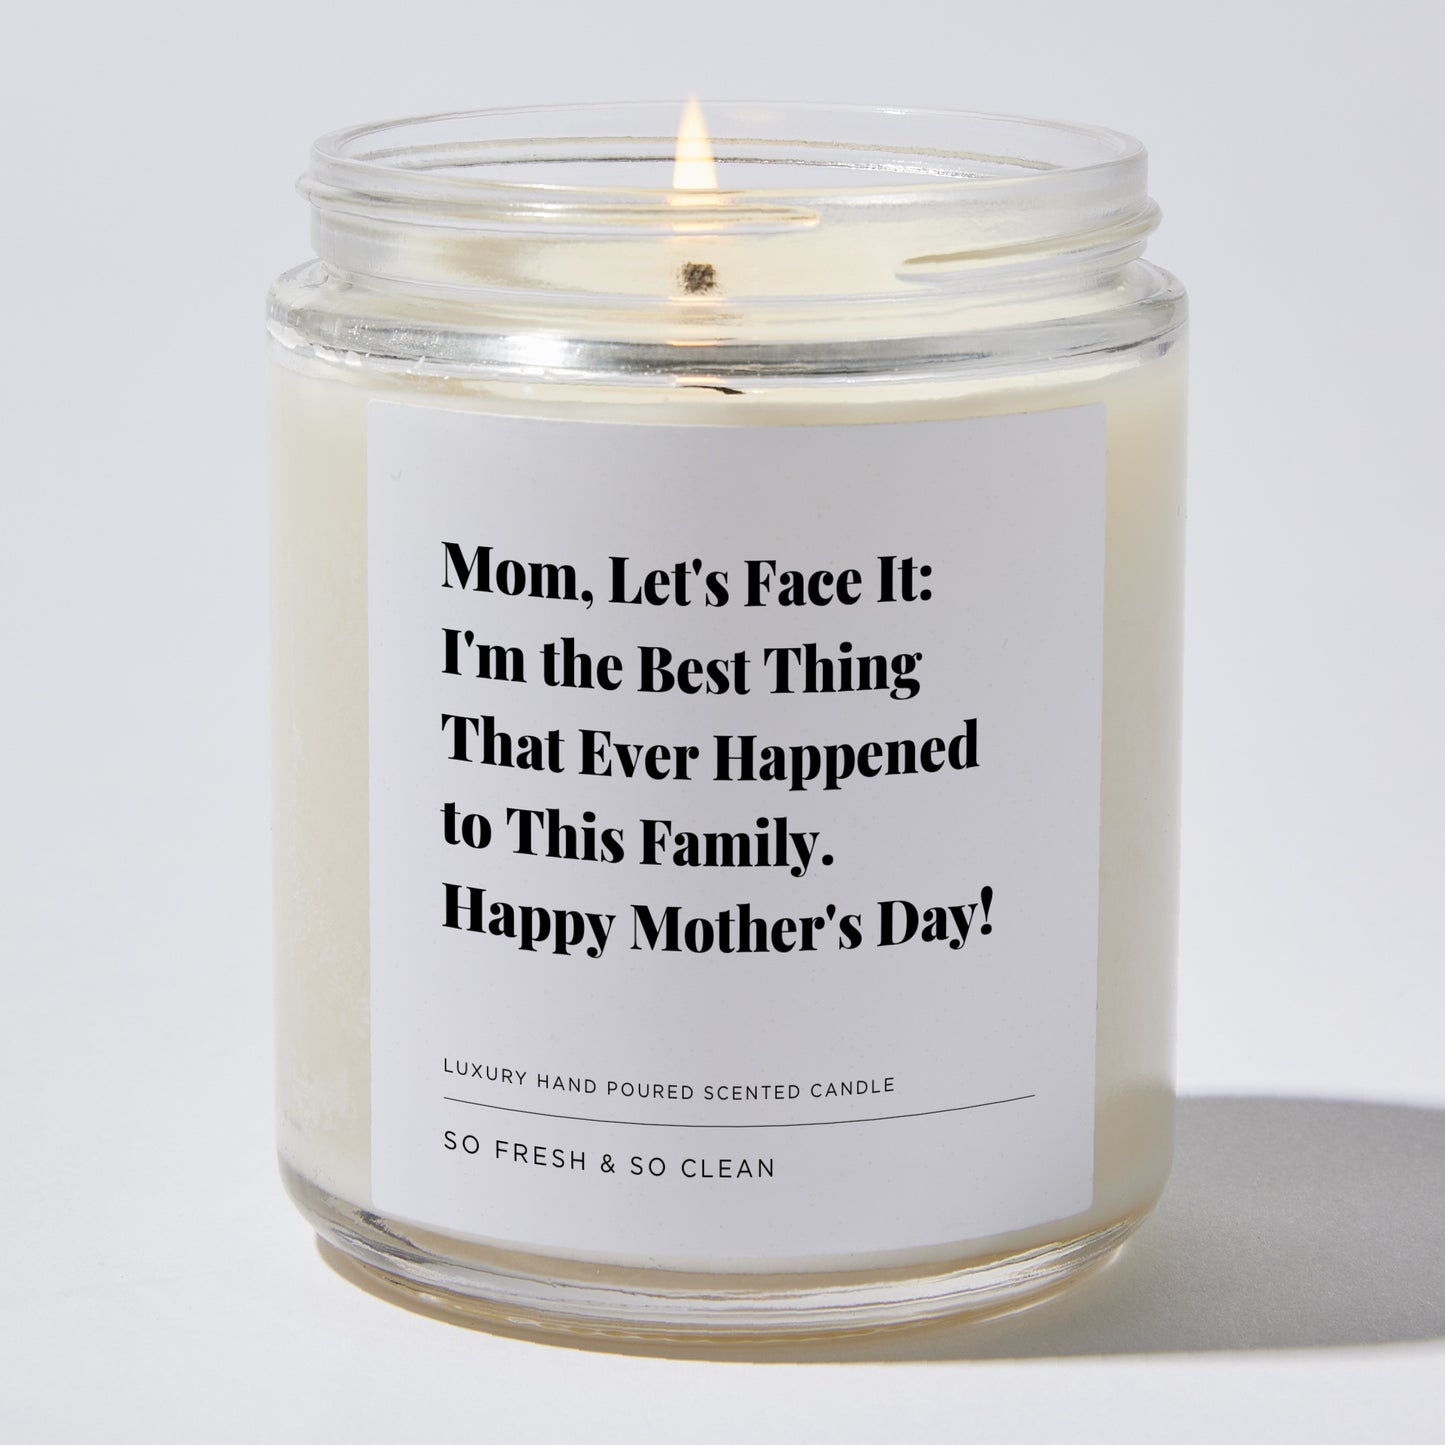 Gift for Mom - Mom, let's face it: I'm the best thing that ever happened to this family. Happy Mother's Day! - Candle